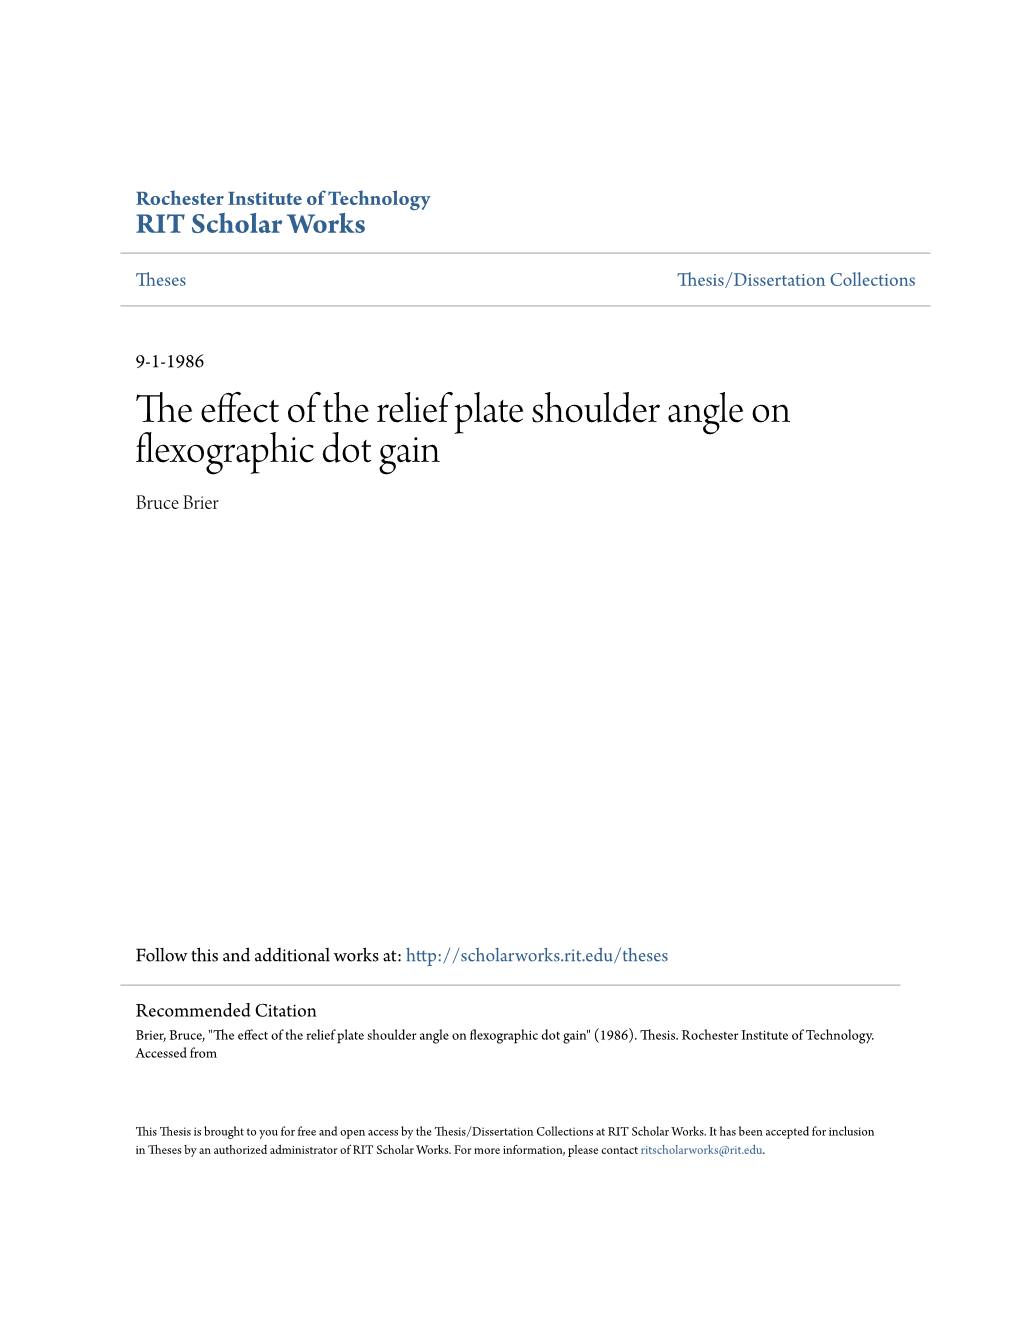 The Effect of the Relief Plate Shoulder Angle on Flexographic Dot Gain Bruce Brier